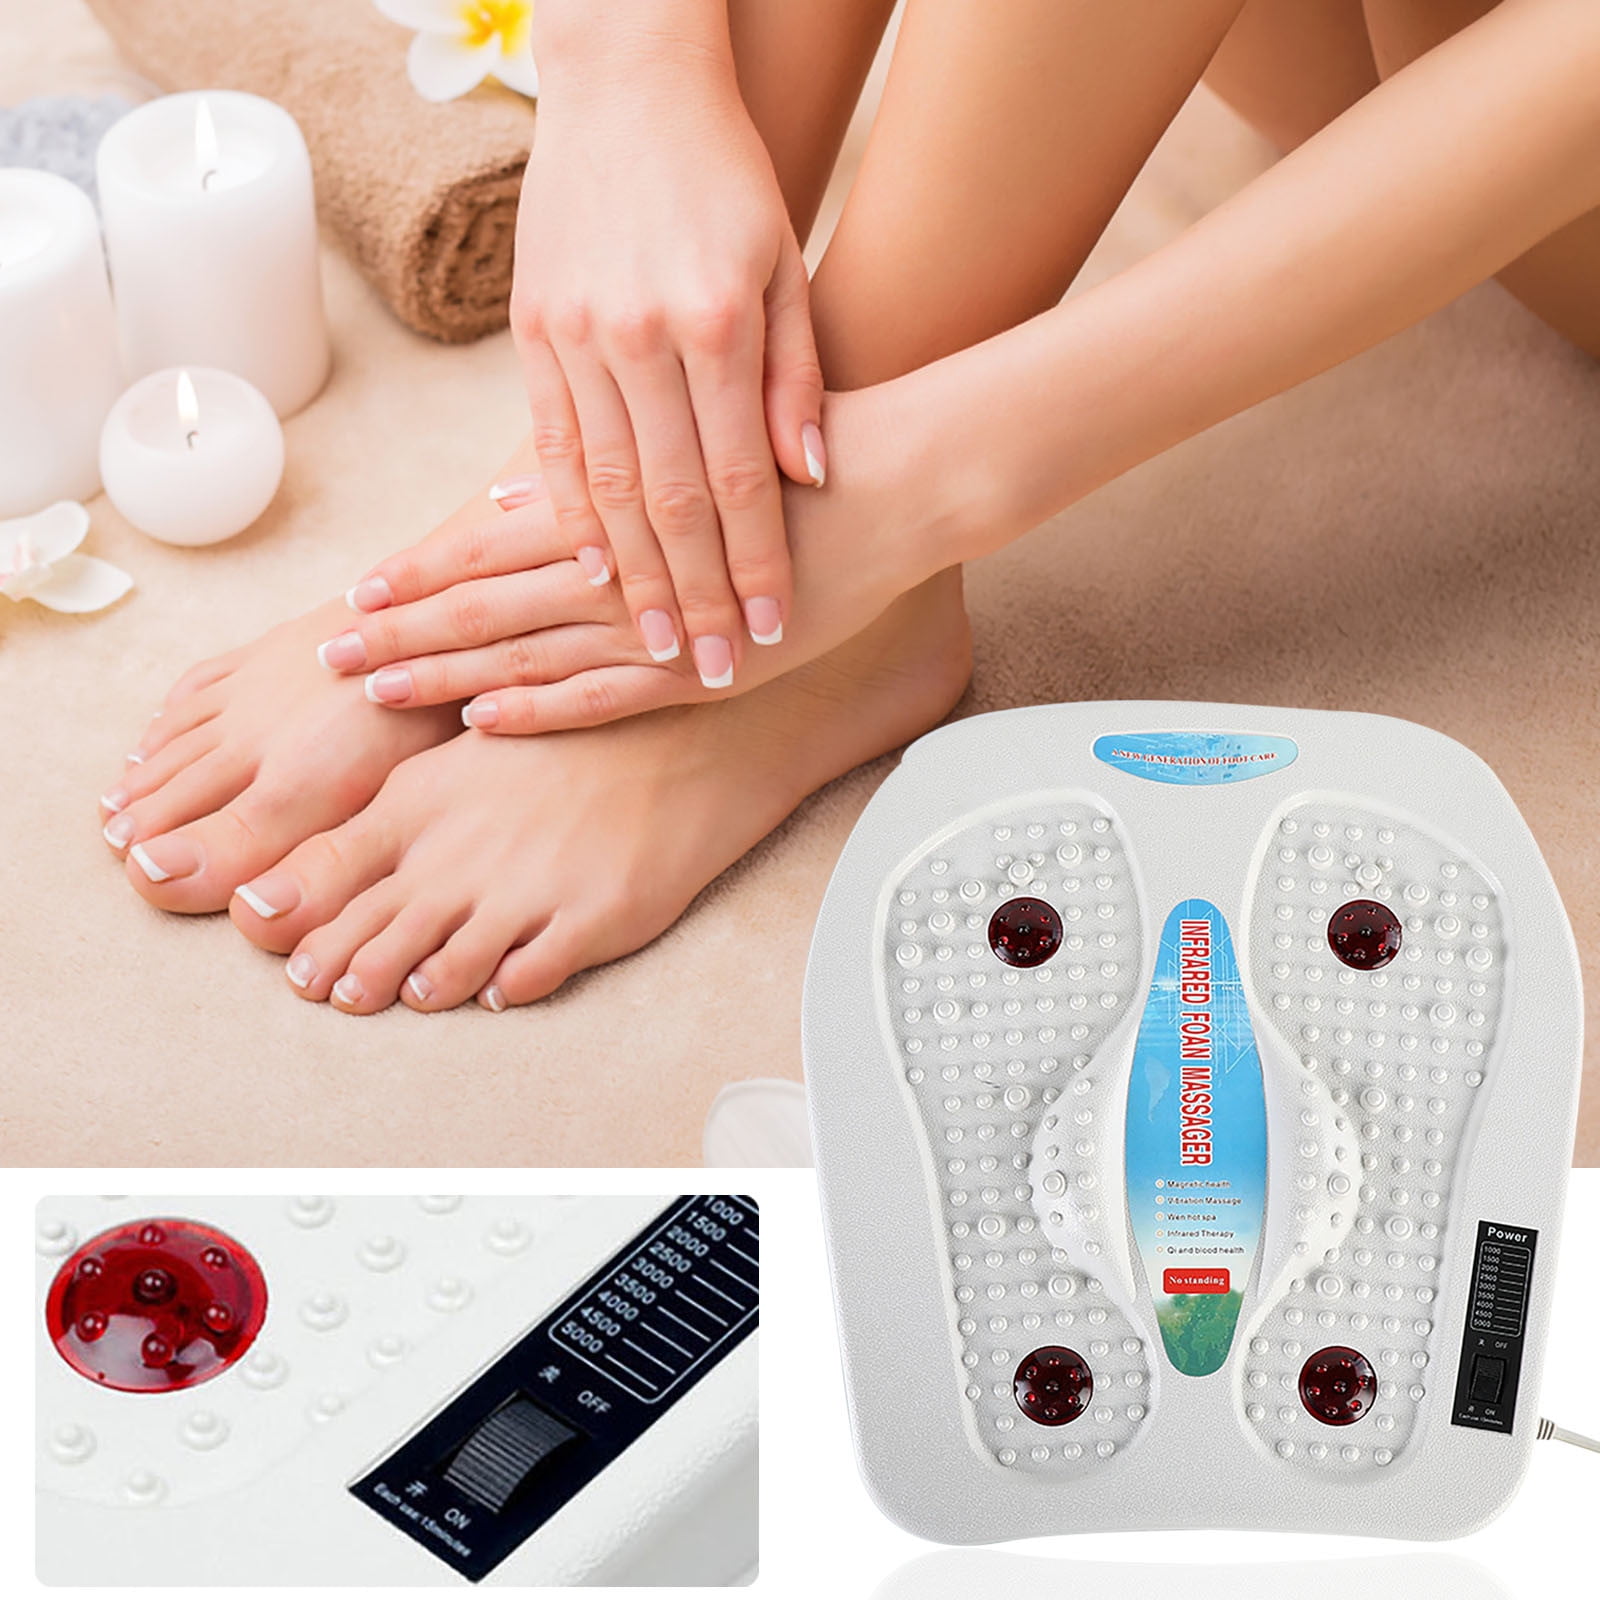 MedMassager Foot Massager Machine MMF07, Electric Therapeutic 11 Speed 